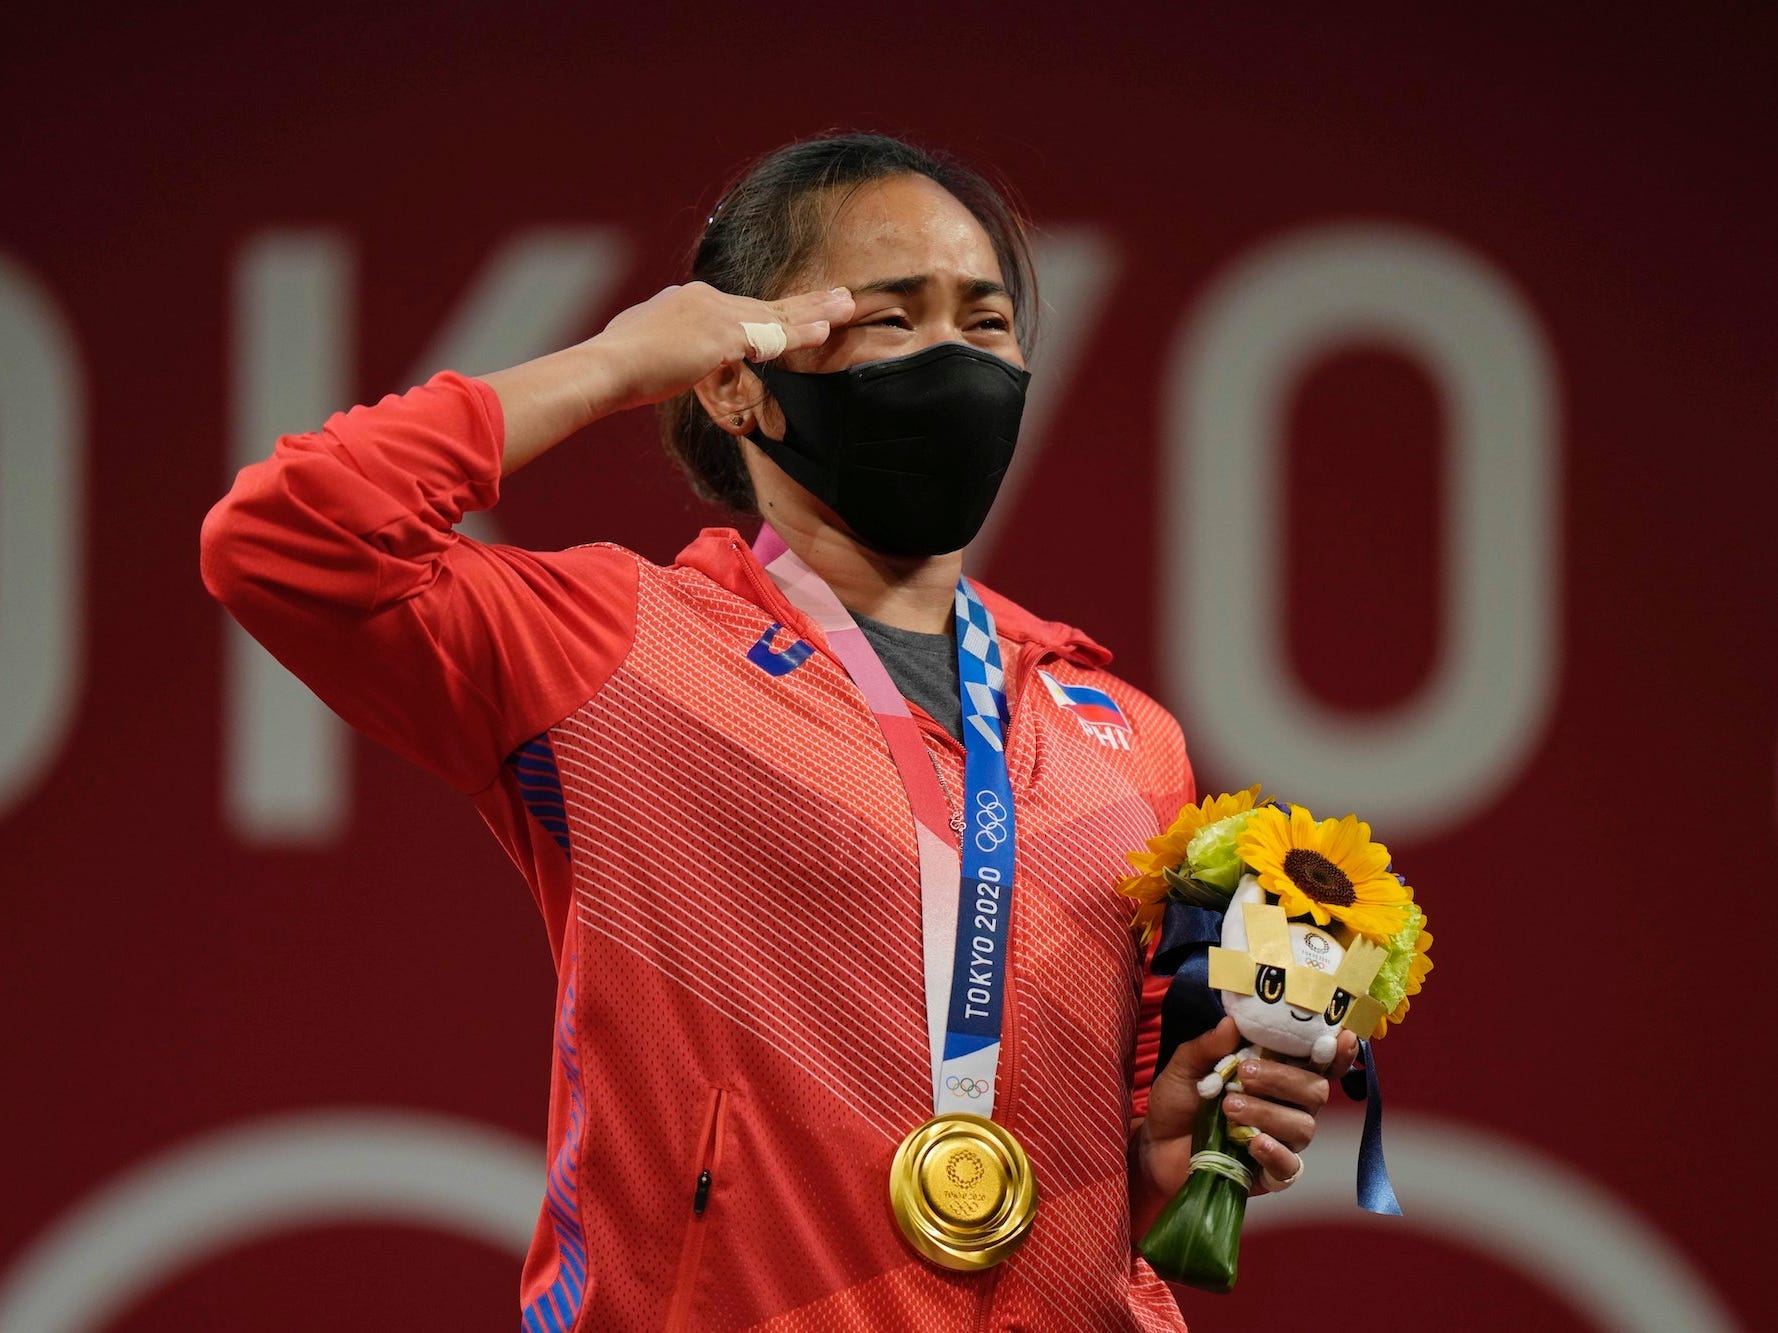 Hidilyn Diaz salutes during the Tokyo Olympics medal ceremony.